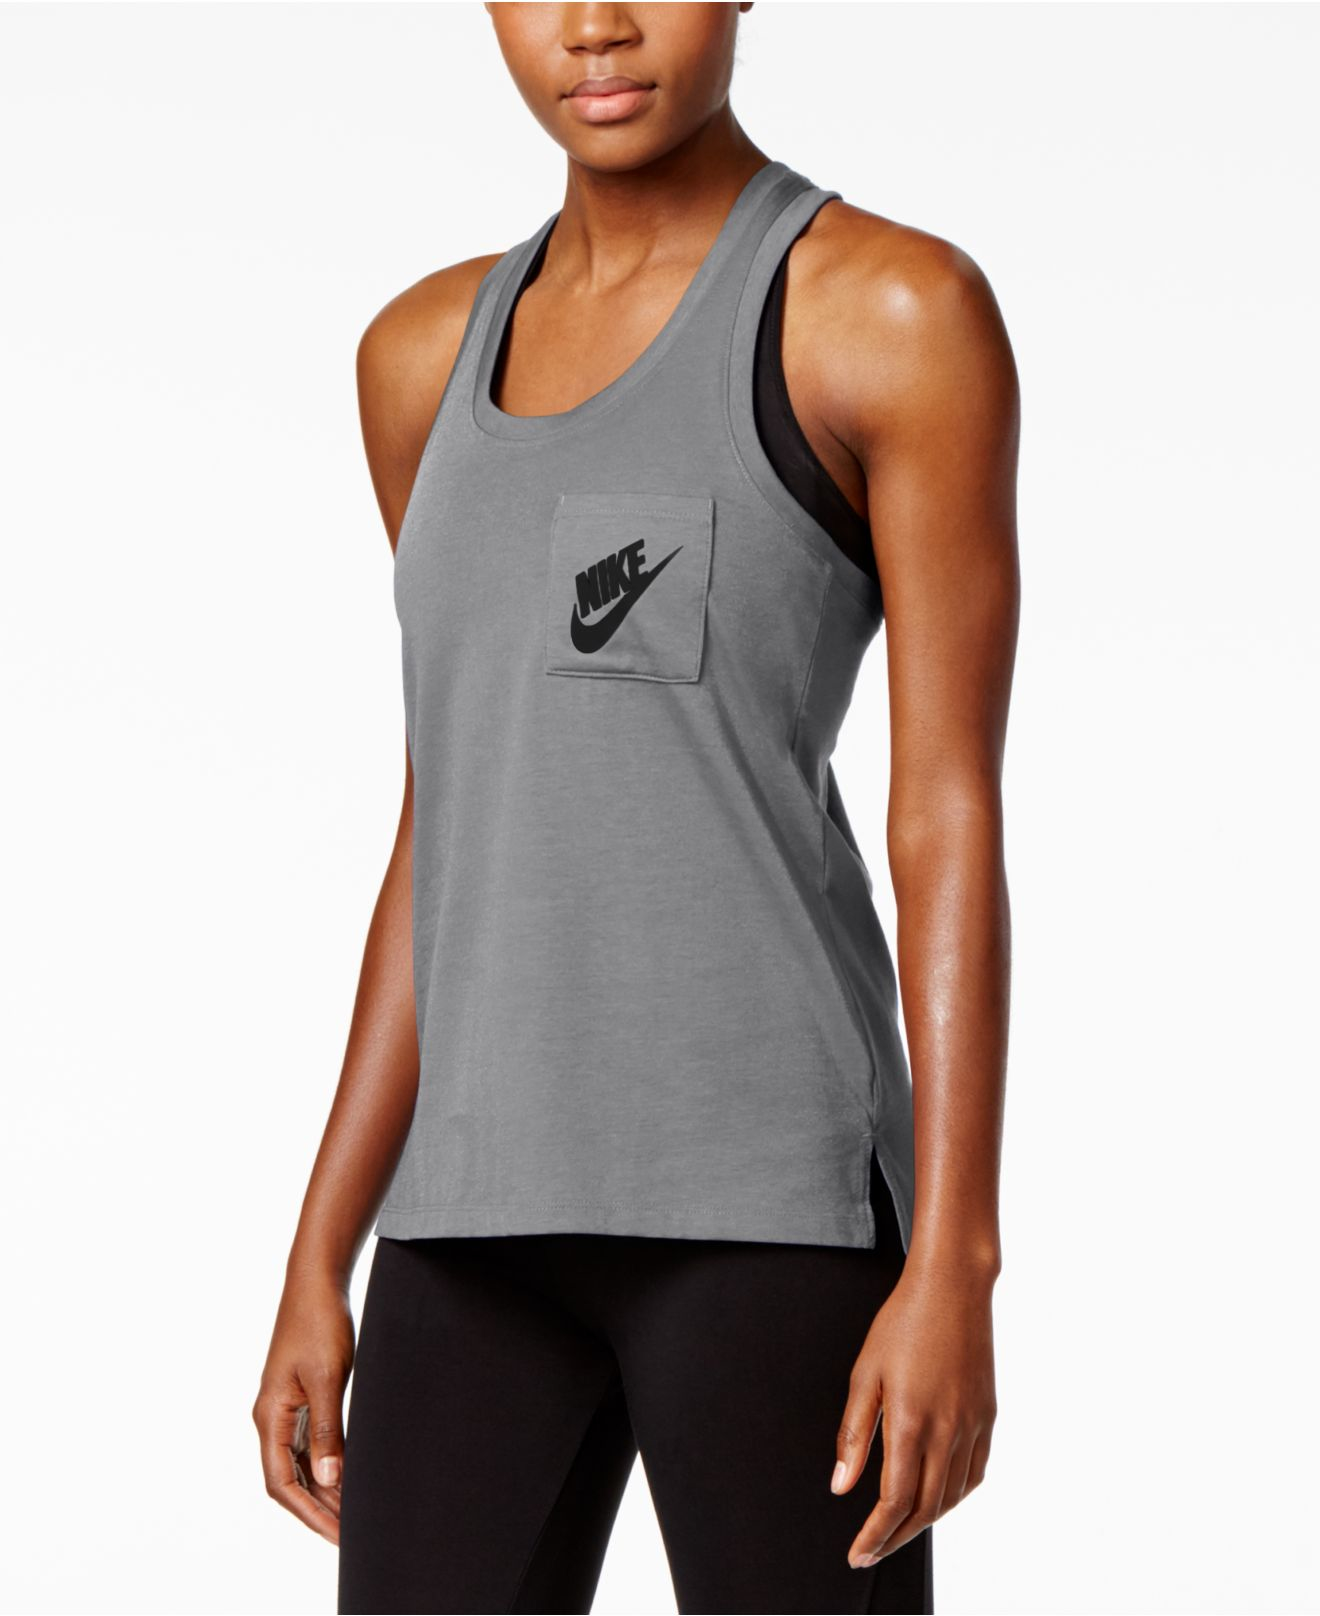 Nike Cotton Signal Racerback Tank Top in Carbon Heather/Black (Gray) - Lyst